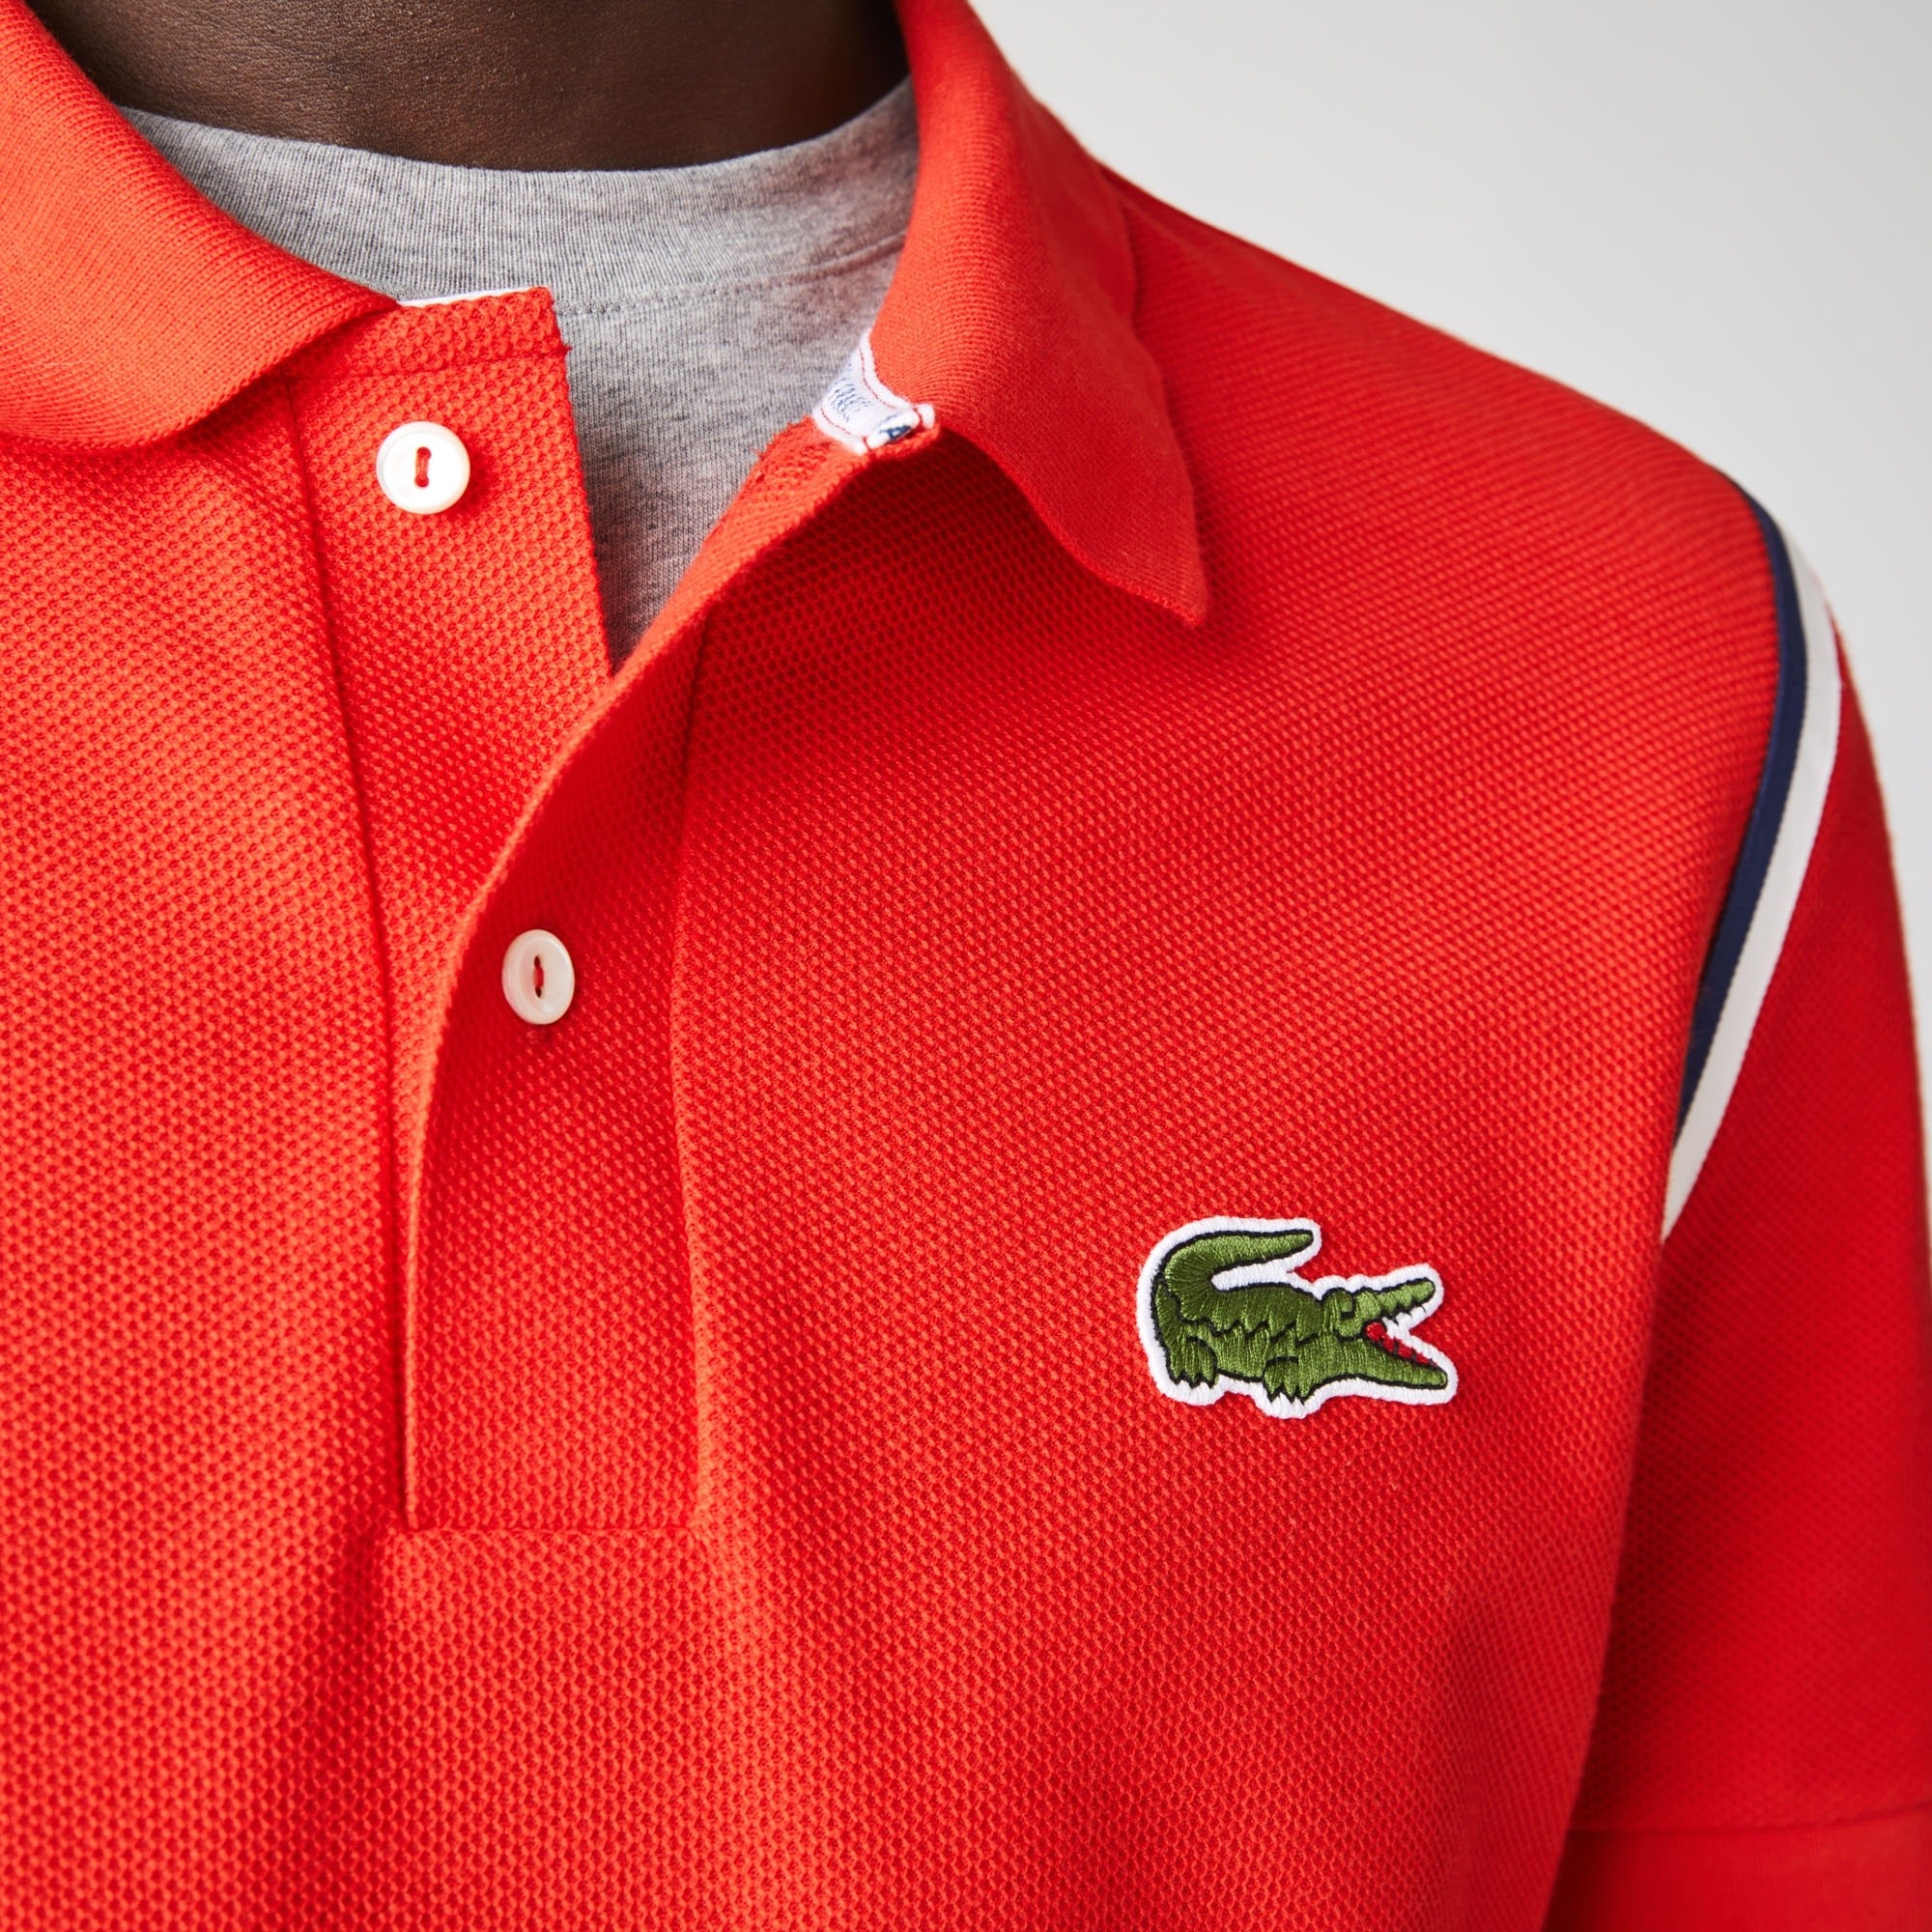 Lacoste french. Lacoste поло made in France. Лакост Polo ворот made in France. Lacoste Polo made in France 90. Chemise Lacoste made in France.